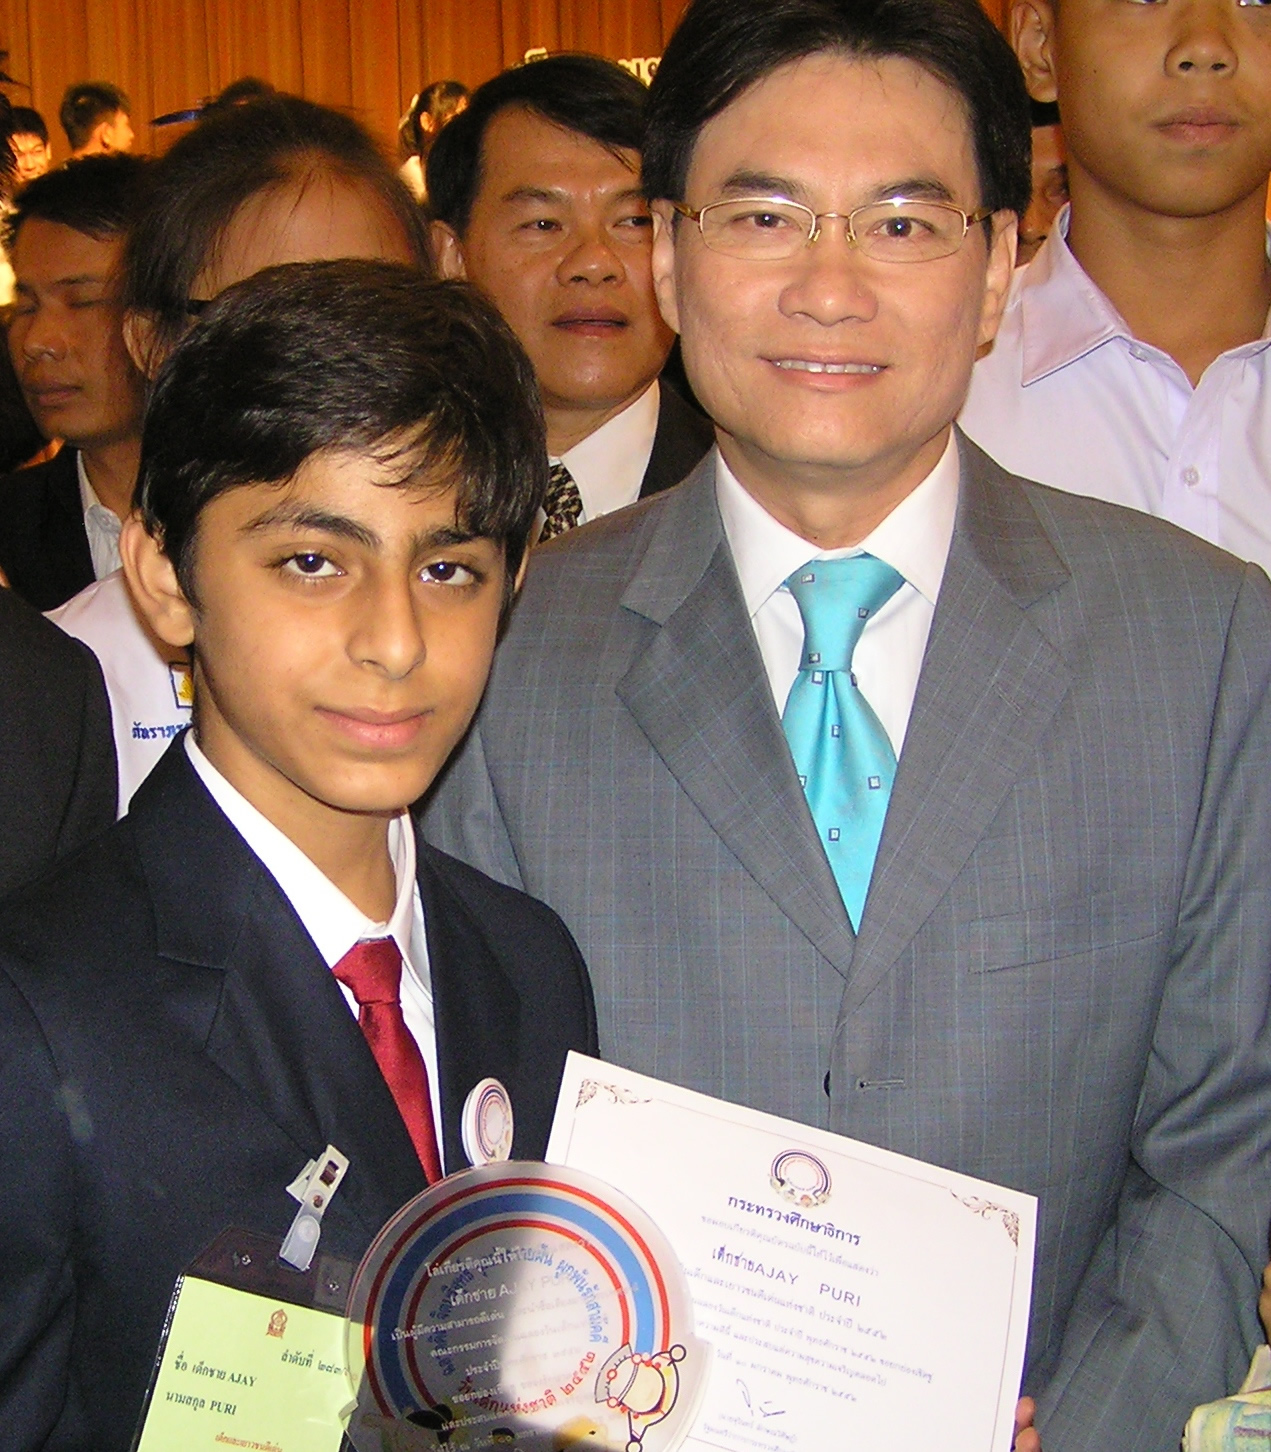 Ajay with Education Minister of Thailand